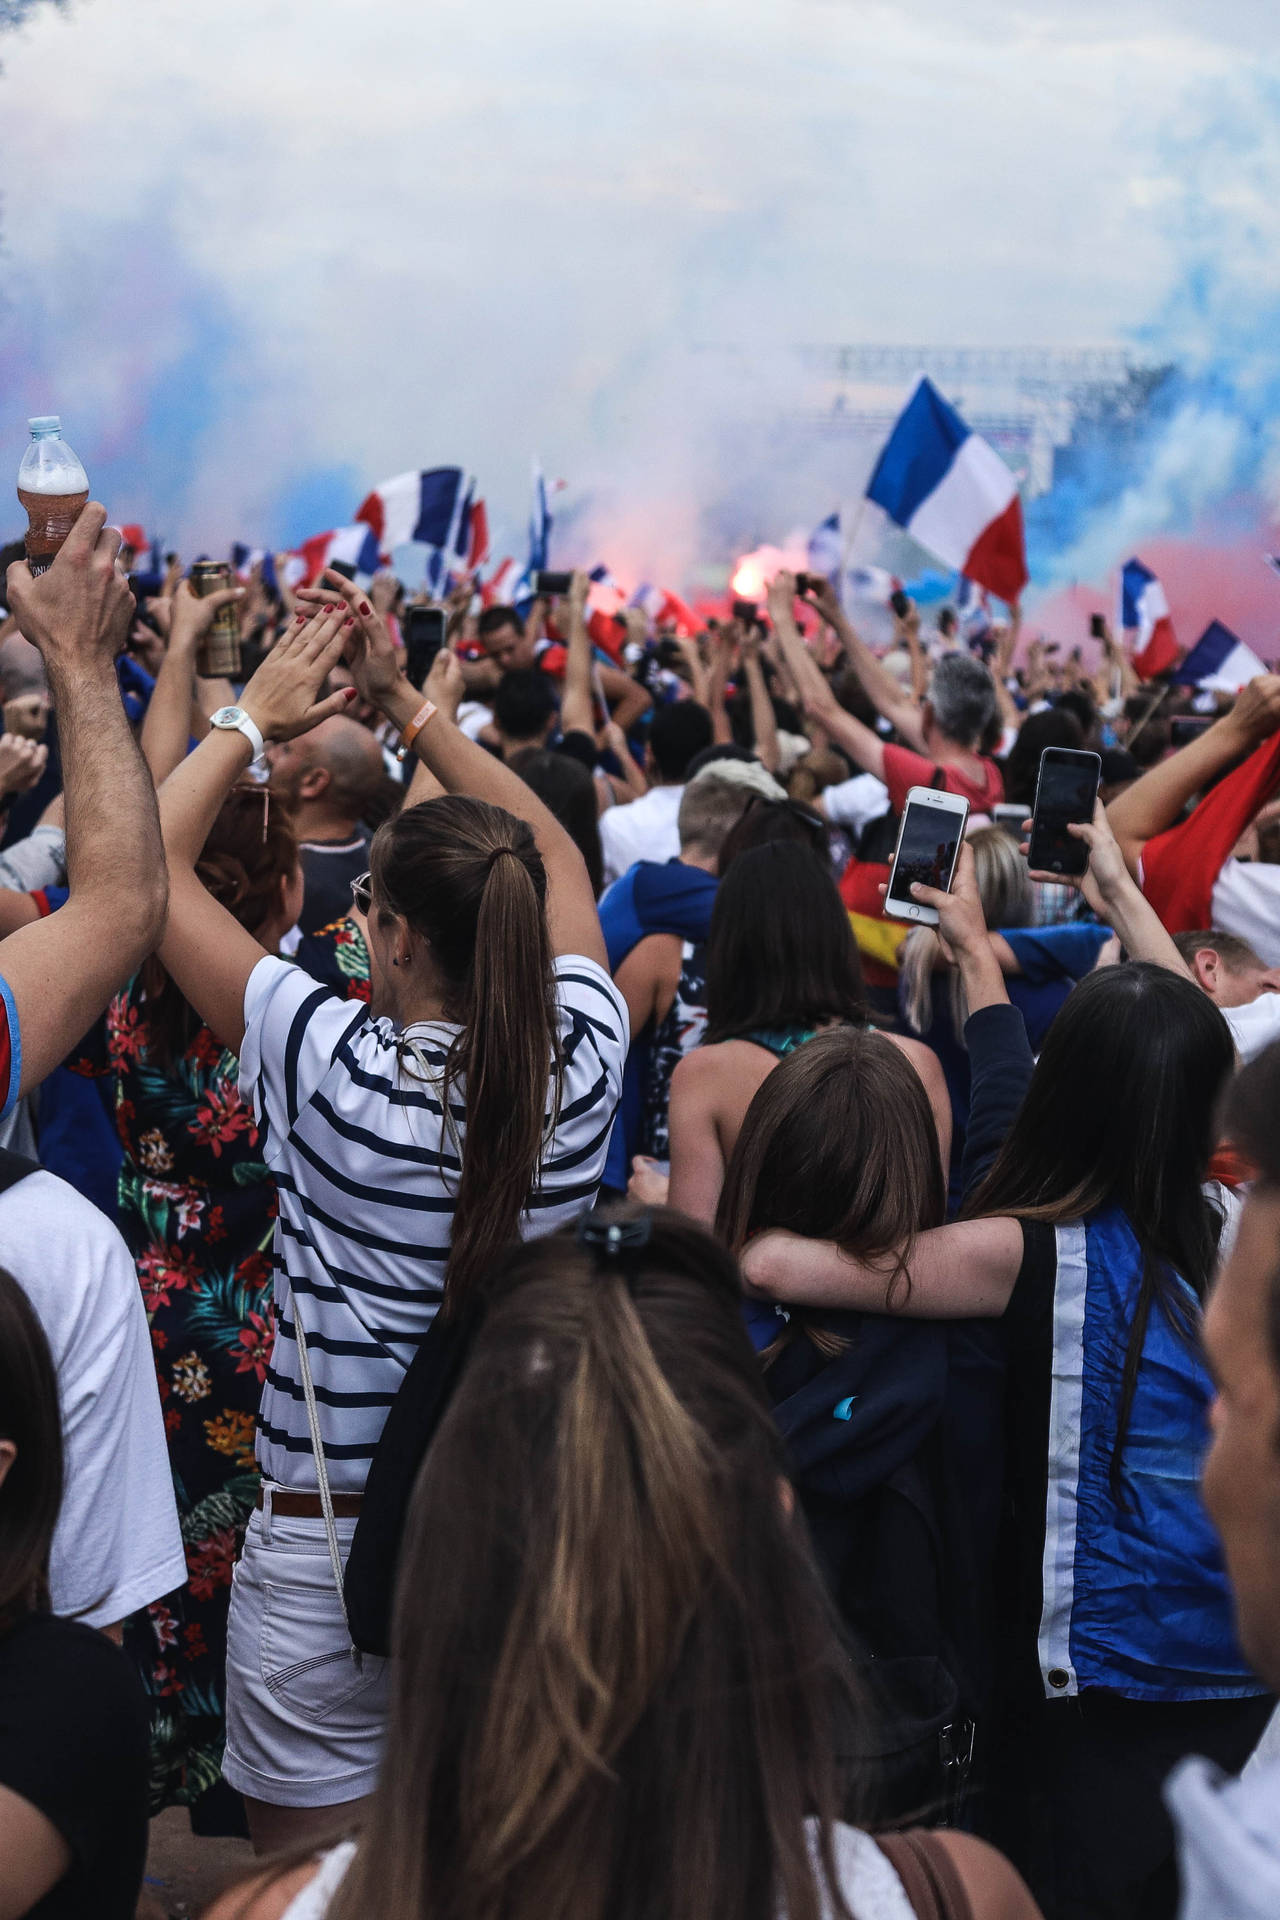 French Fans Proudly Show Their National Pride During The World Cup. Background